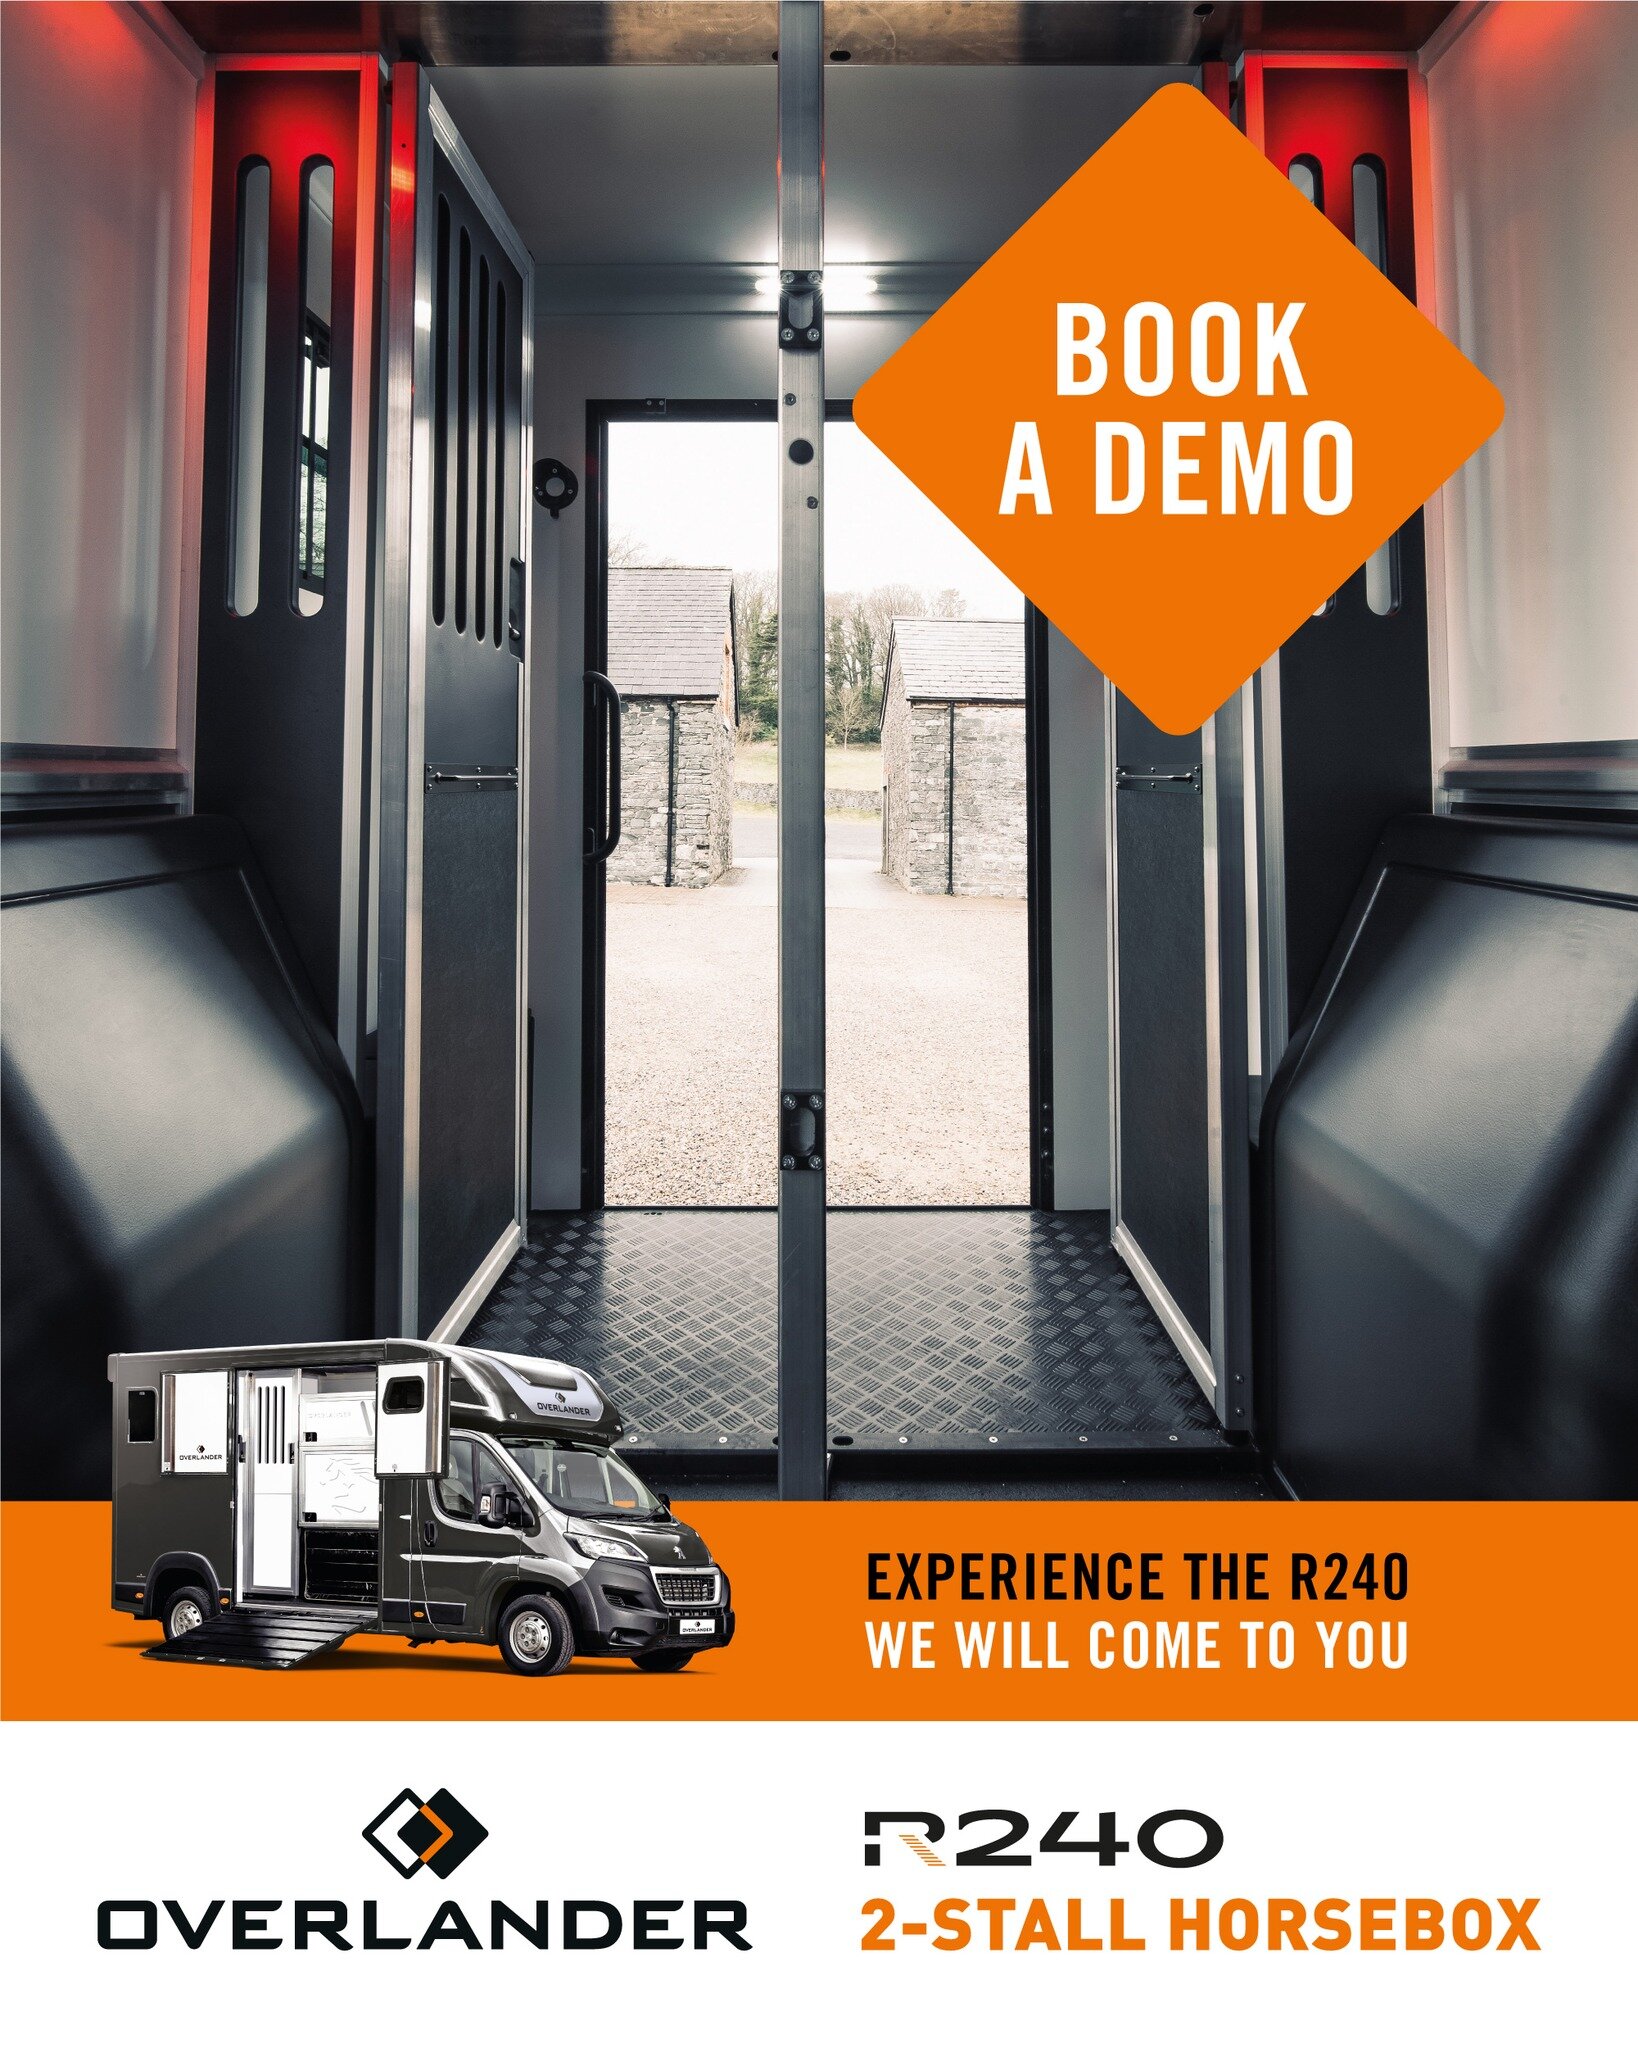 📅🤝 Experience the Ultimate Convenience! 🤝📅
Ready to explore our incredible R240 2-Stall in person? We've got you covered! Book your in-person demo at a time and place that suits you, and our team will come to you with the horsebox. Take a closer 